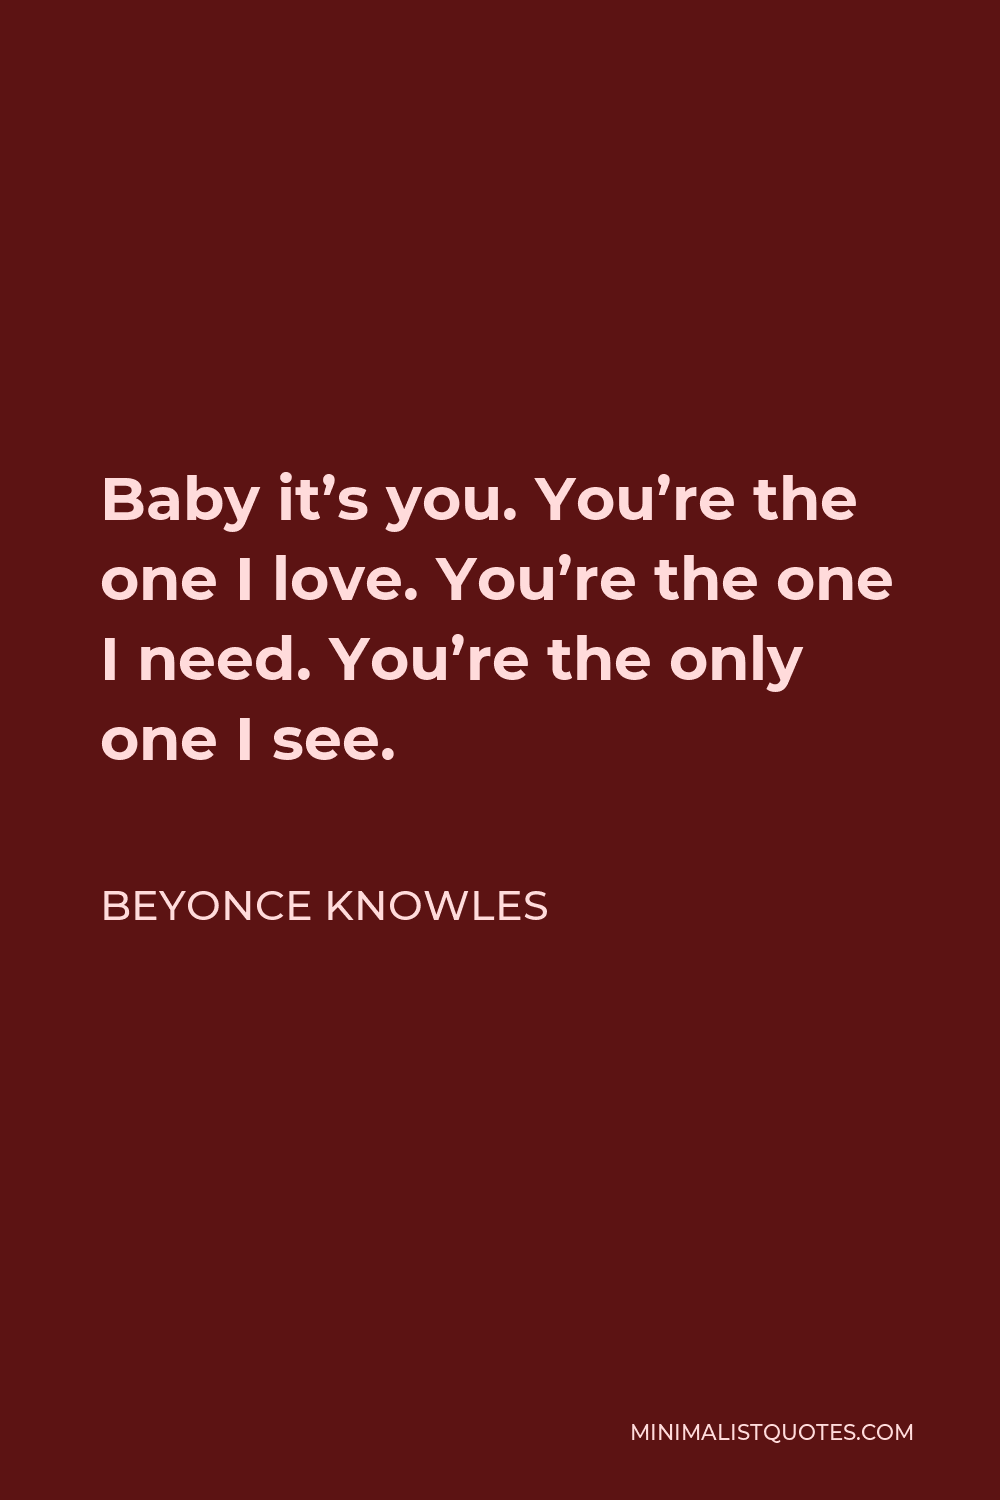 Beyonce Knowles Quote - Baby it’s you. You’re the one I love. You’re the one I need. You’re the only one I see.